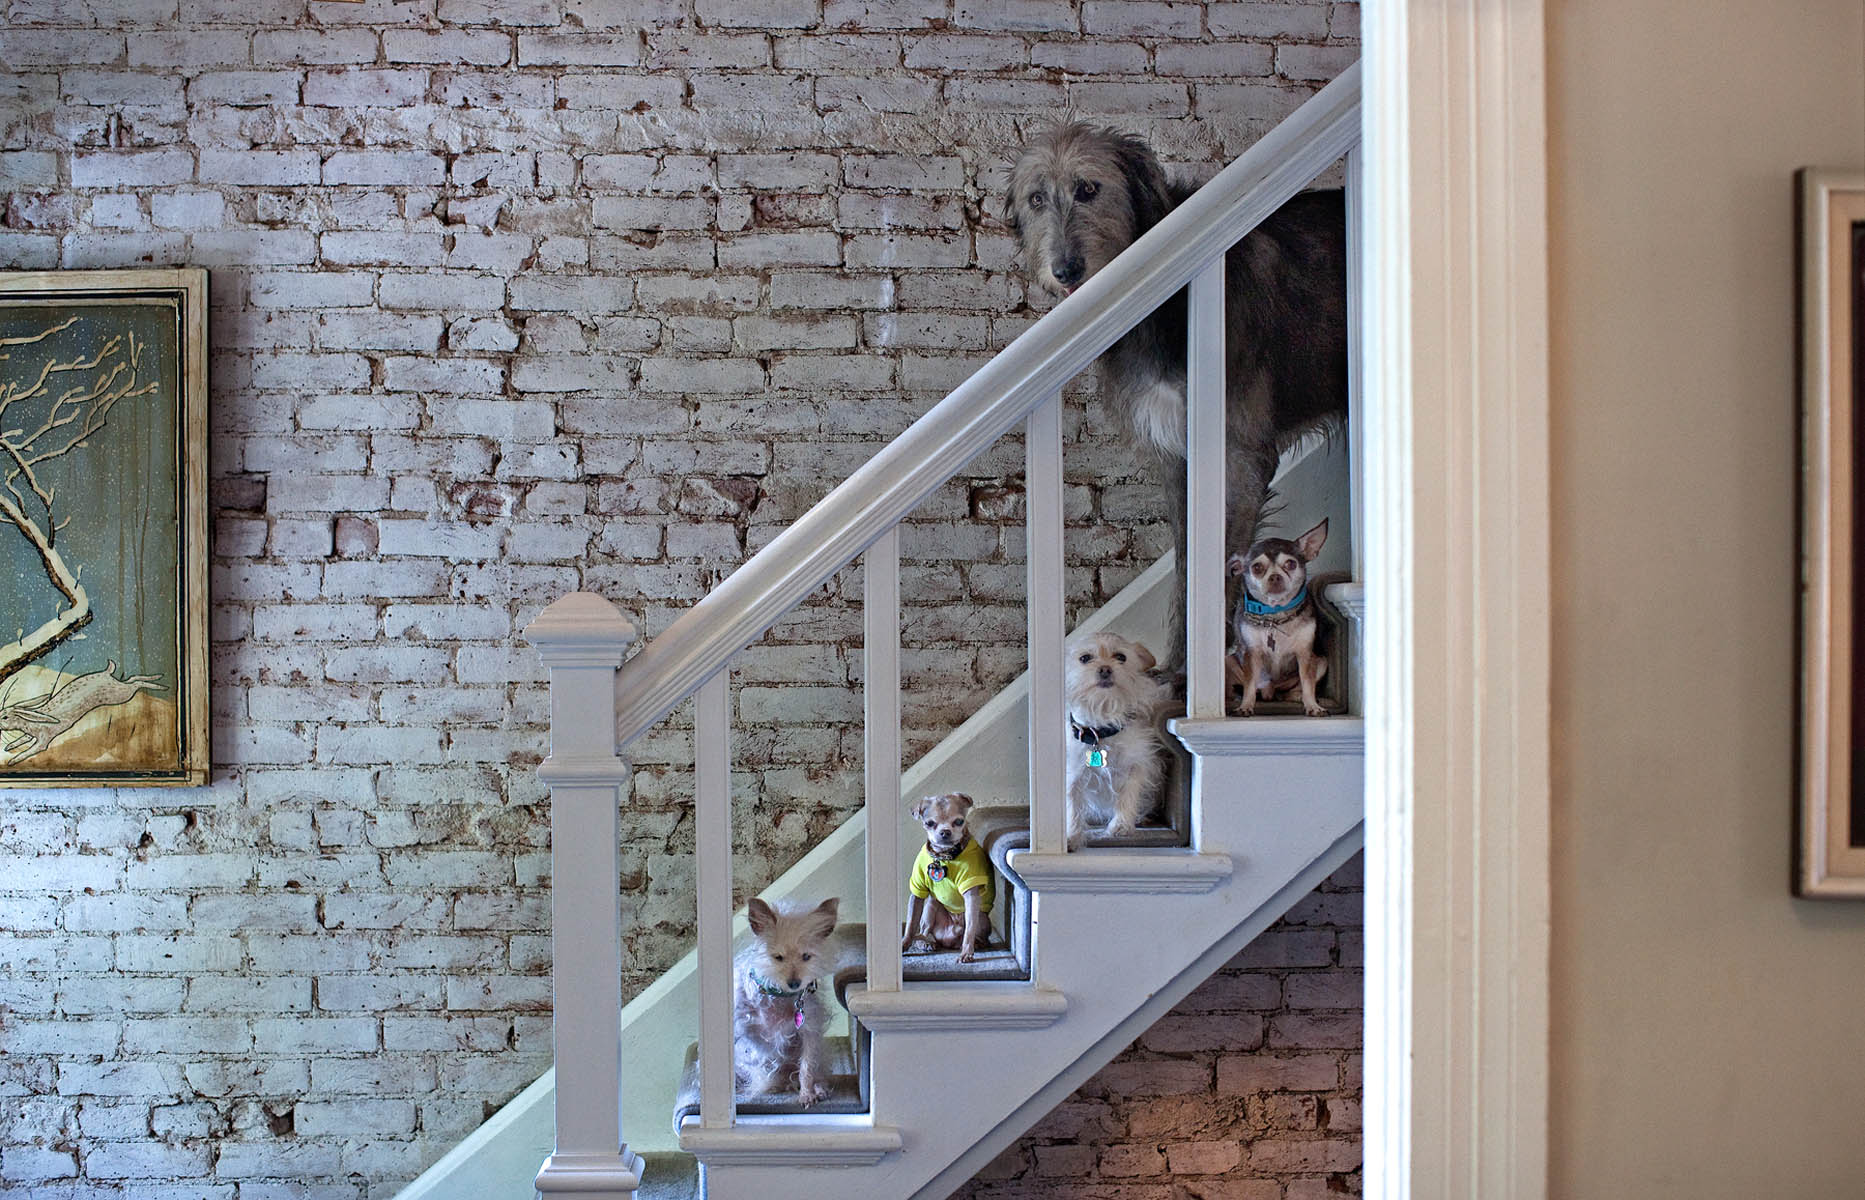 Dog coming down the stairs - Nancy LeVine